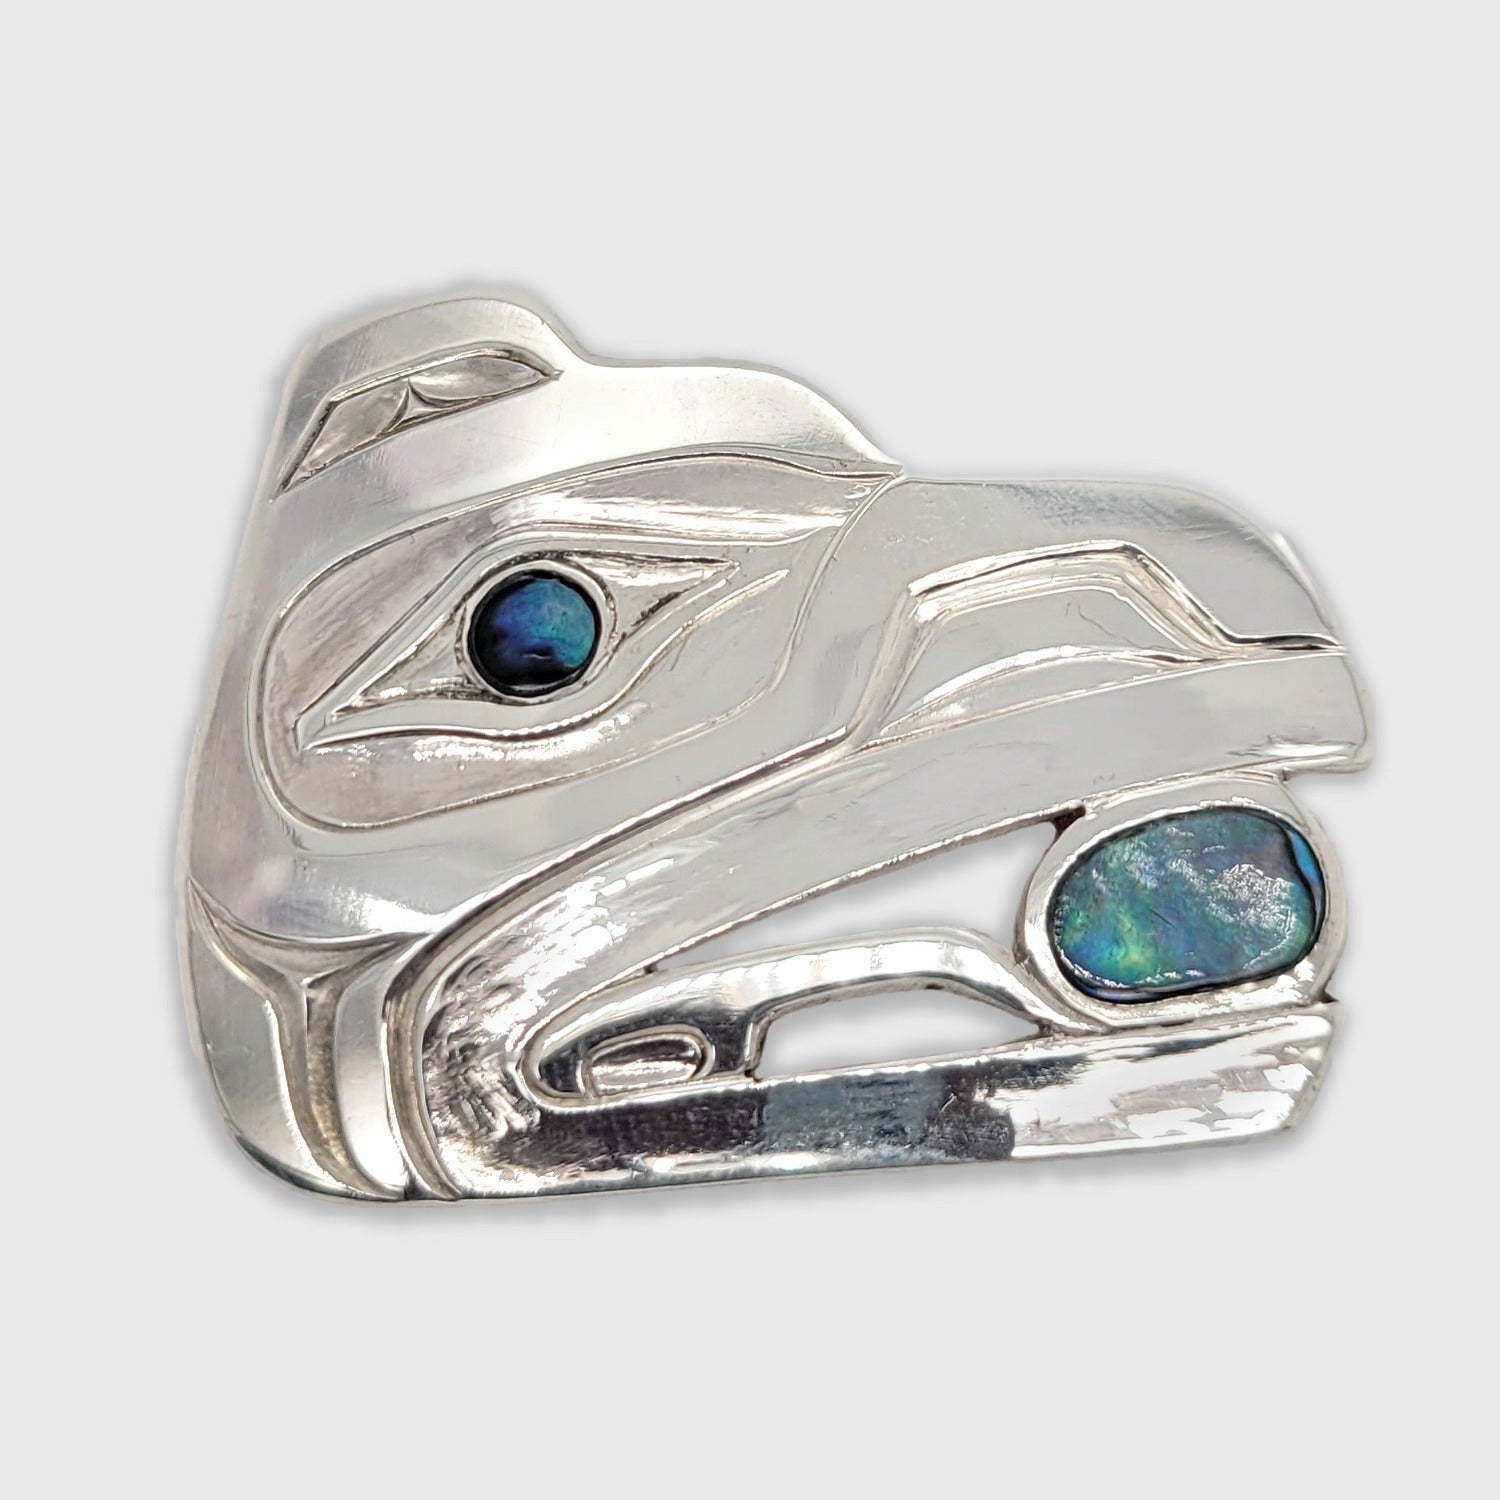 Raven Steals the Light Silver & Abalone Pendant by Haida artist